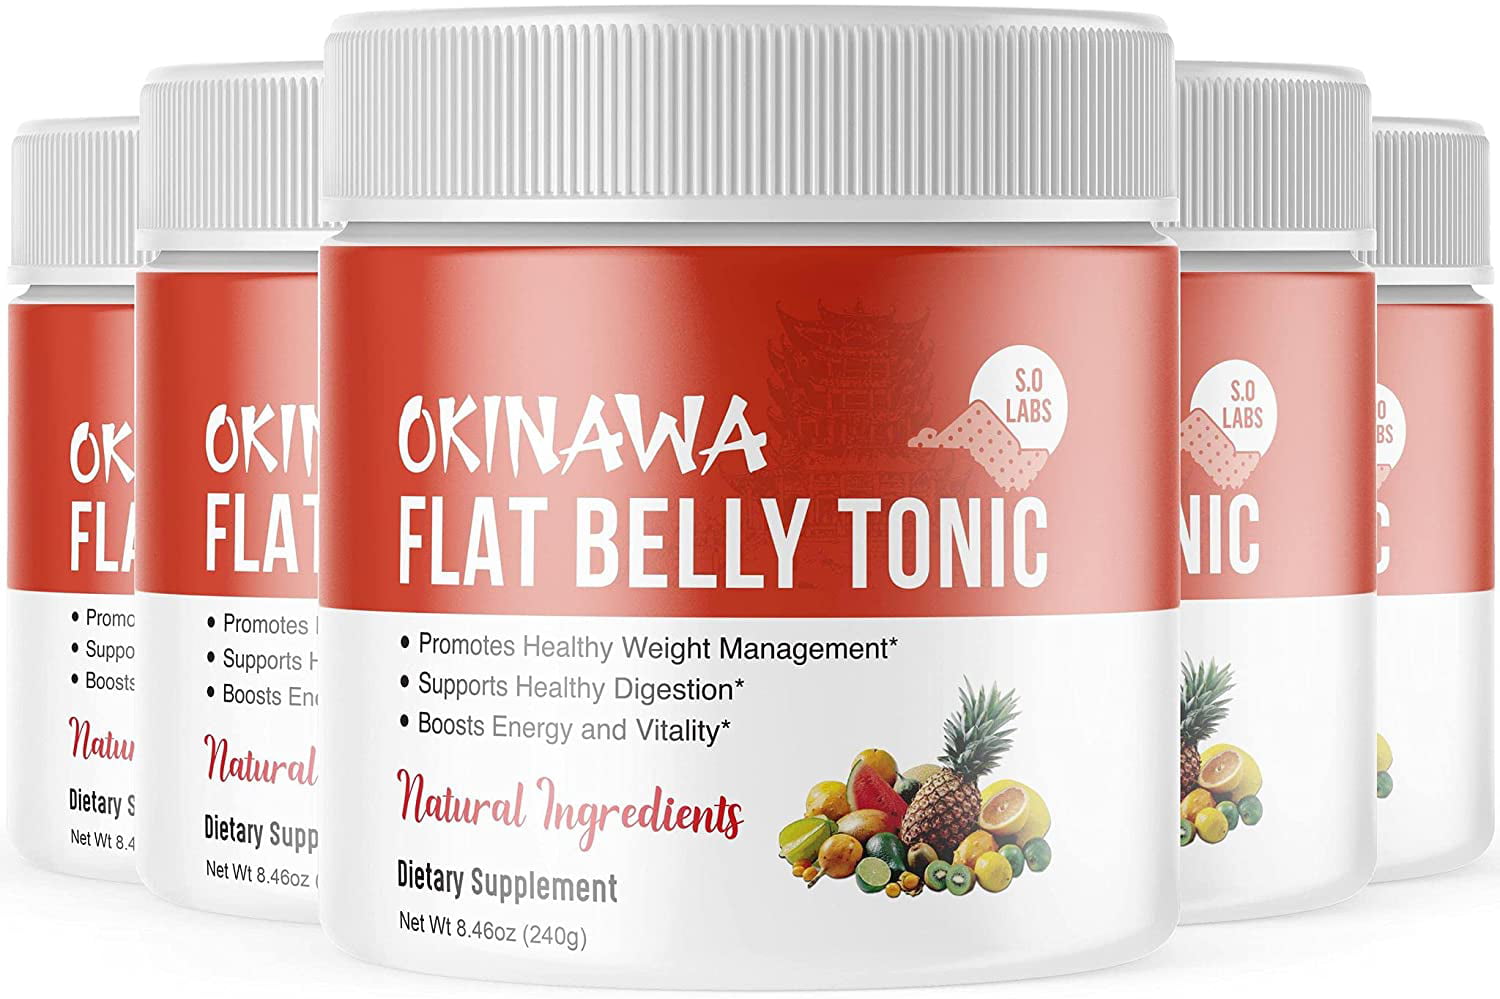 Okinawa - Flat Belly Tonic - Powder for Weight Loss - Energy Boosting  Supplements for Weight Management - Advanced Ketogenic BHB Ketones (1 Pack)  - Walmart.com